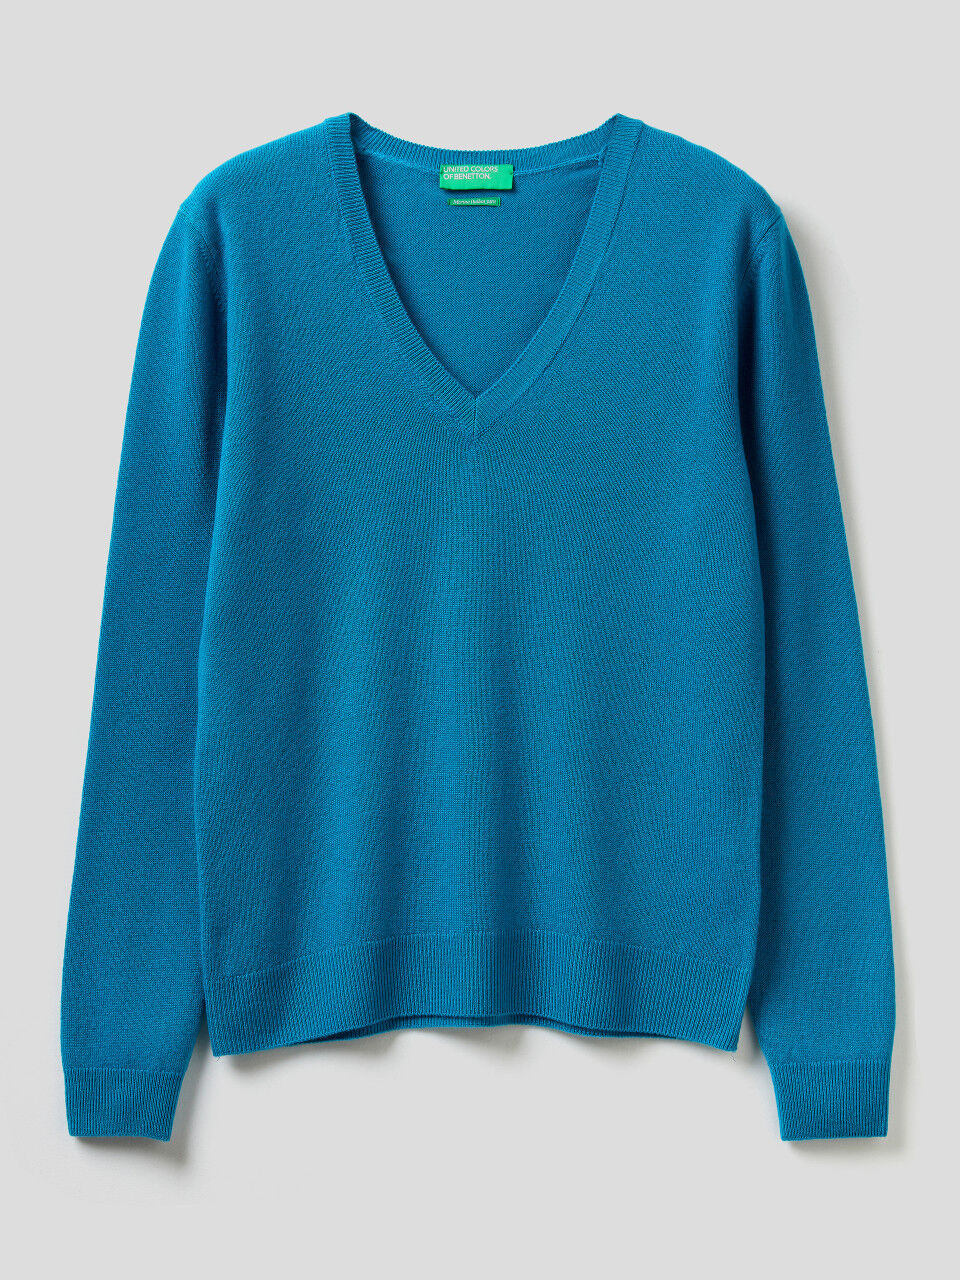 United Colors of Benetton Womens V Neck Sweater H/S Jumper 